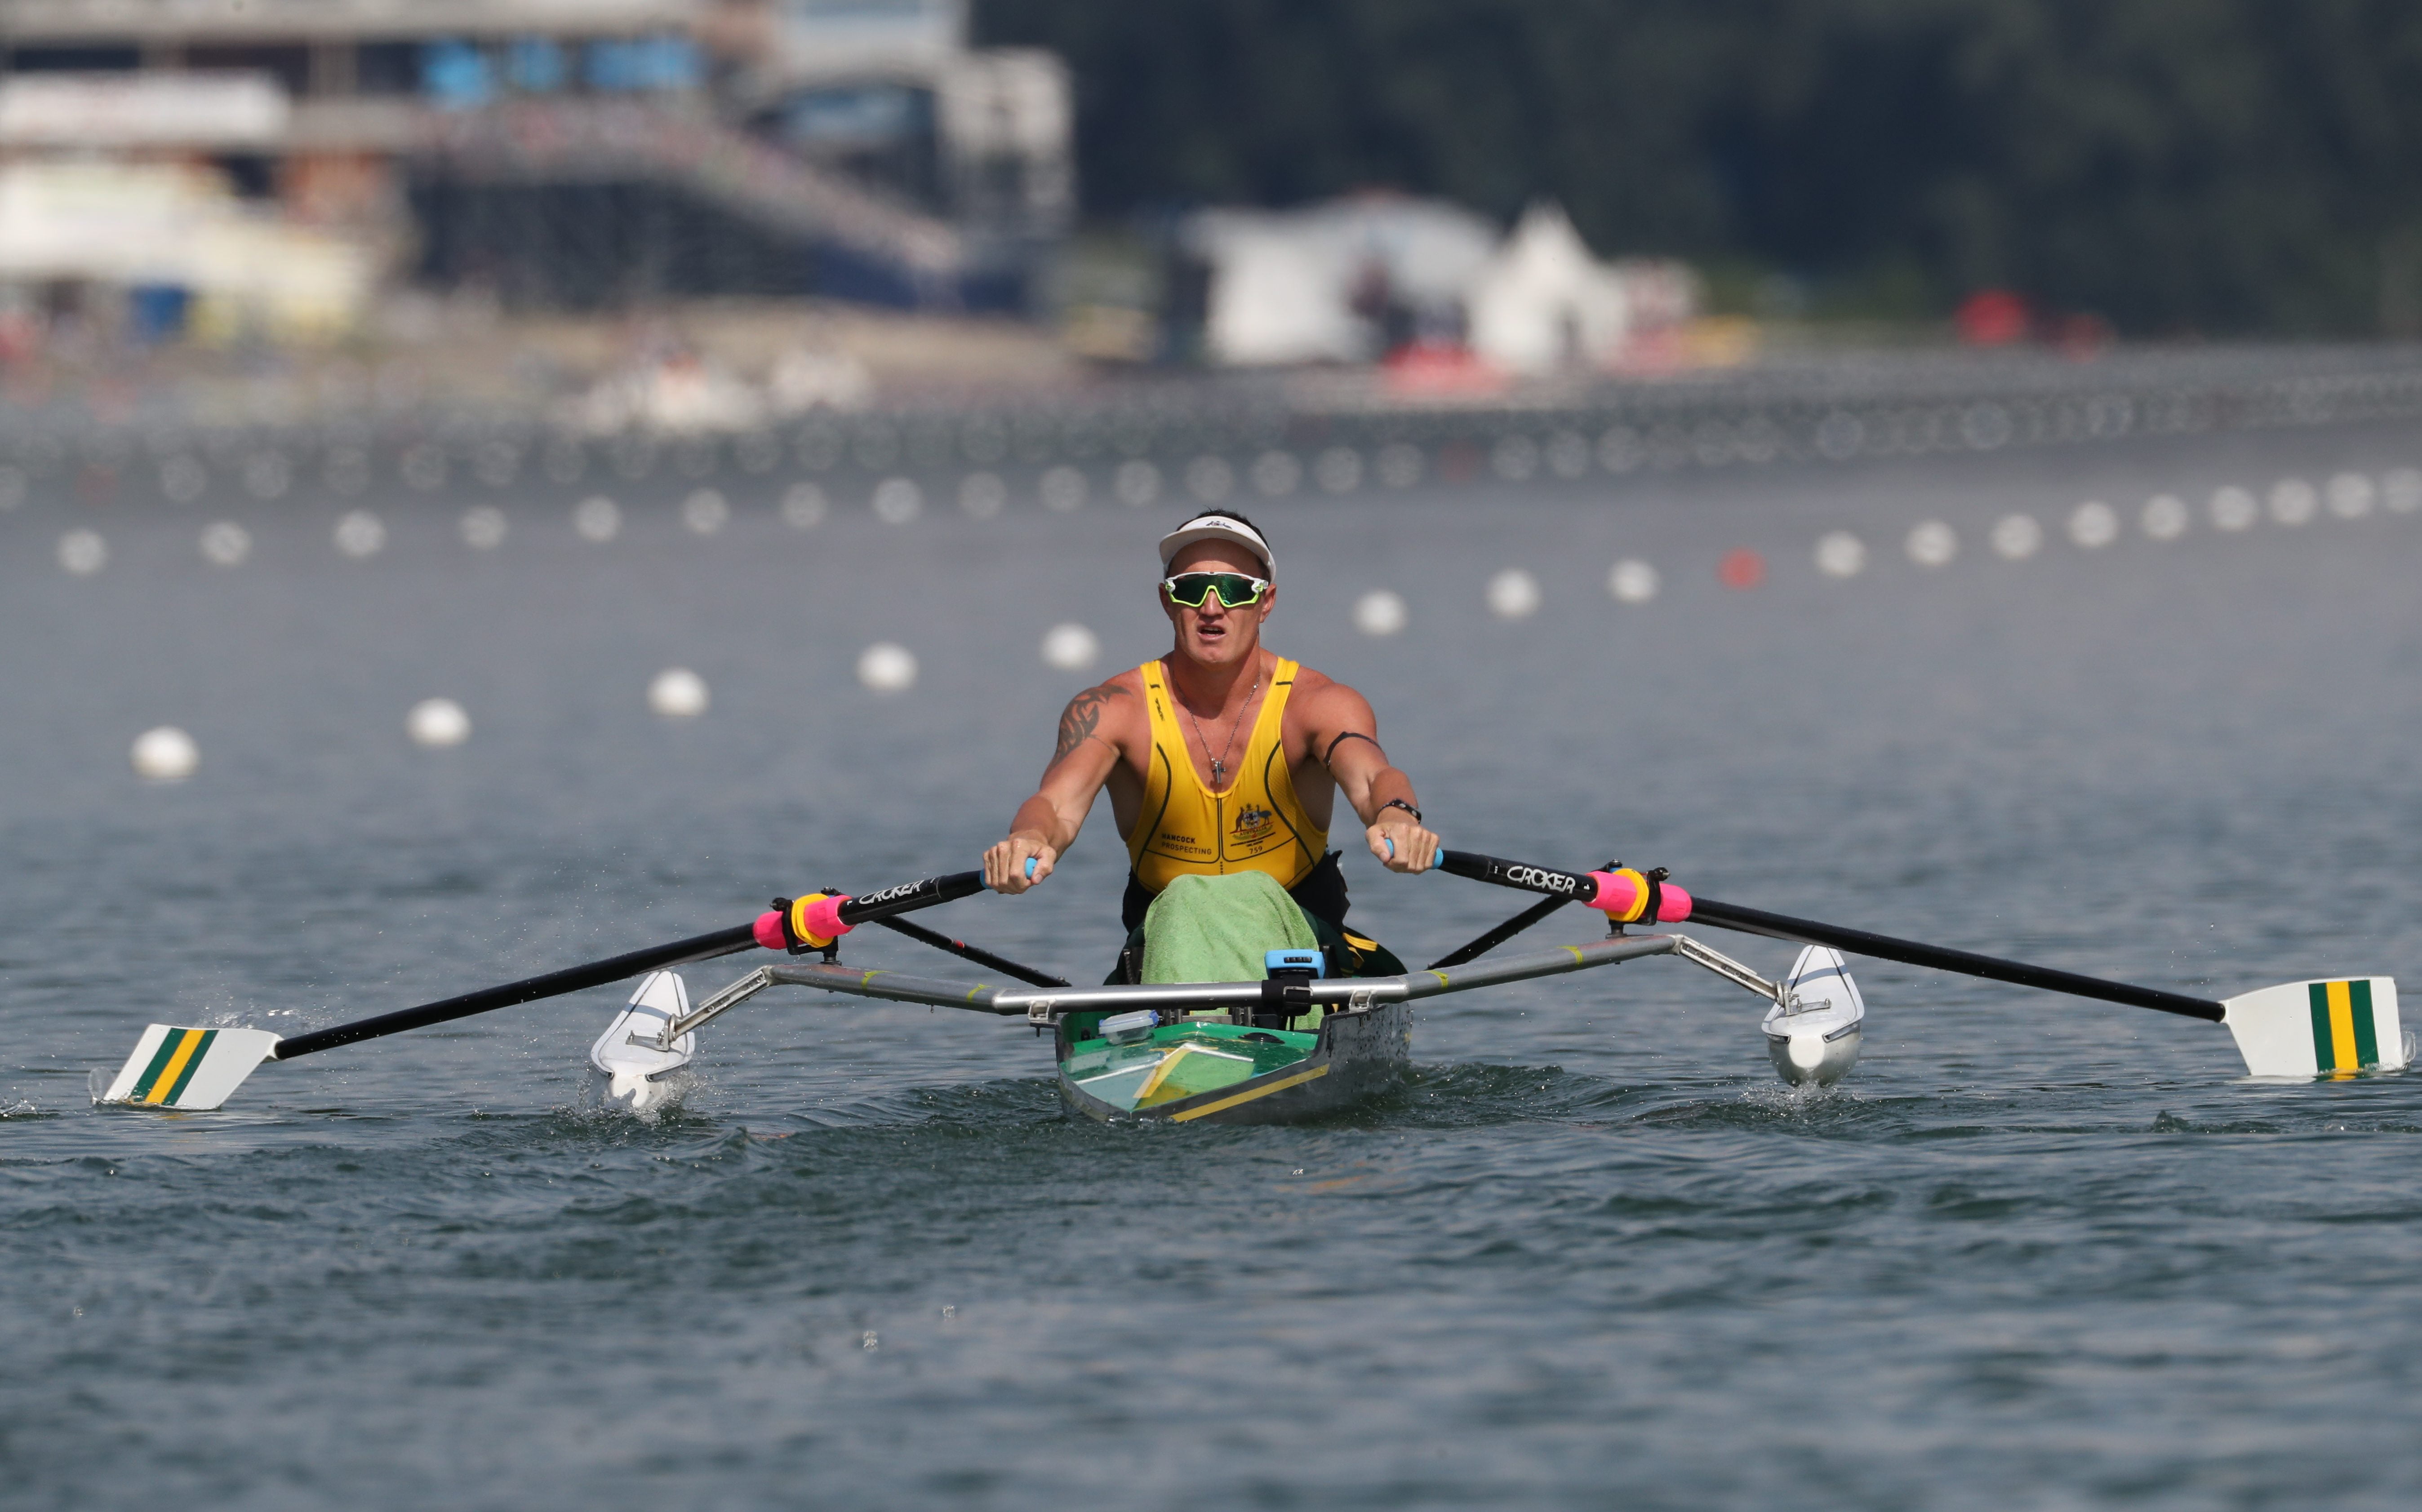 2019 World Rowing Championships sees Australia looking to qualify two Paralympic berths